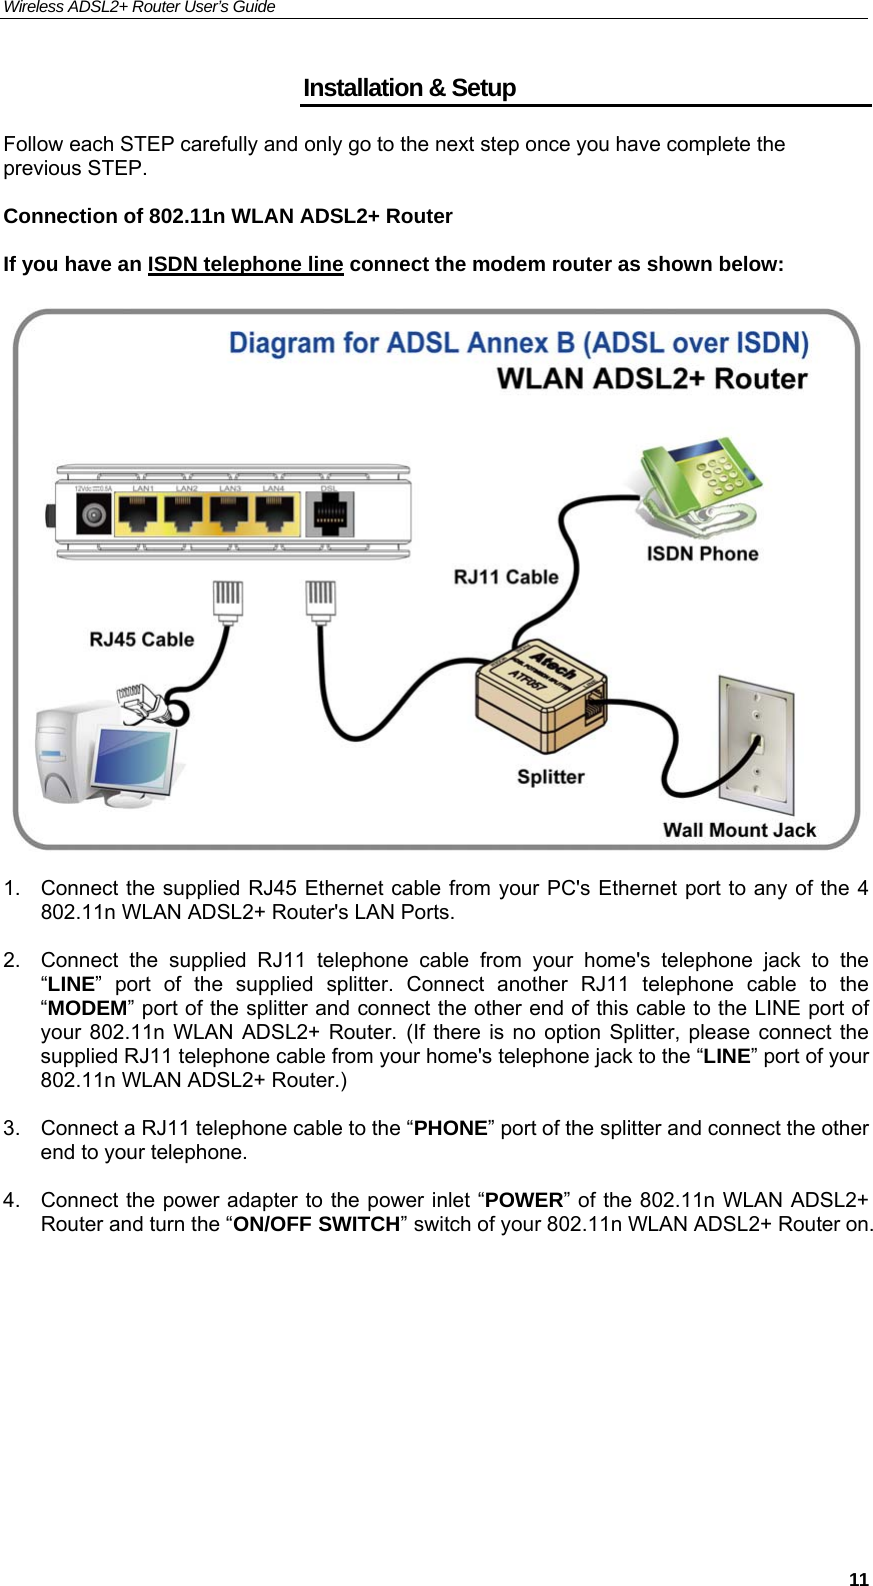 Wireless ADSL2+ Router User’s Guide     11Installation &amp; Setup Follow each STEP carefully and only go to the next step once you have complete the previous STEP.  Connection of 802.11n WLAN ADSL2+ Router  If you have an ISDN telephone line connect the modem router as shown below:     1.  Connect the supplied RJ45 Ethernet cable from your PC&apos;s Ethernet port to any of the 4 802.11n WLAN ADSL2+ Router&apos;s LAN Ports.  2.  Connect the supplied RJ11 telephone cable from your home&apos;s telephone jack to the “LINE” port of the supplied splitter. Connect another RJ11 telephone cable to the “MODEM” port of the splitter and connect the other end of this cable to the LINE port of your 802.11n WLAN ADSL2+ Router. (If there is no option Splitter, please connect the supplied RJ11 telephone cable from your home&apos;s telephone jack to the “LINE” port of your 802.11n WLAN ADSL2+ Router.)  3.  Connect a RJ11 telephone cable to the “PHONE” port of the splitter and connect the other end to your telephone.  4.  Connect the power adapter to the power inlet “POWER” of the 802.11n WLAN ADSL2+ Router and turn the “ON/OFF SWITCH” switch of your 802.11n WLAN ADSL2+ Router on.     